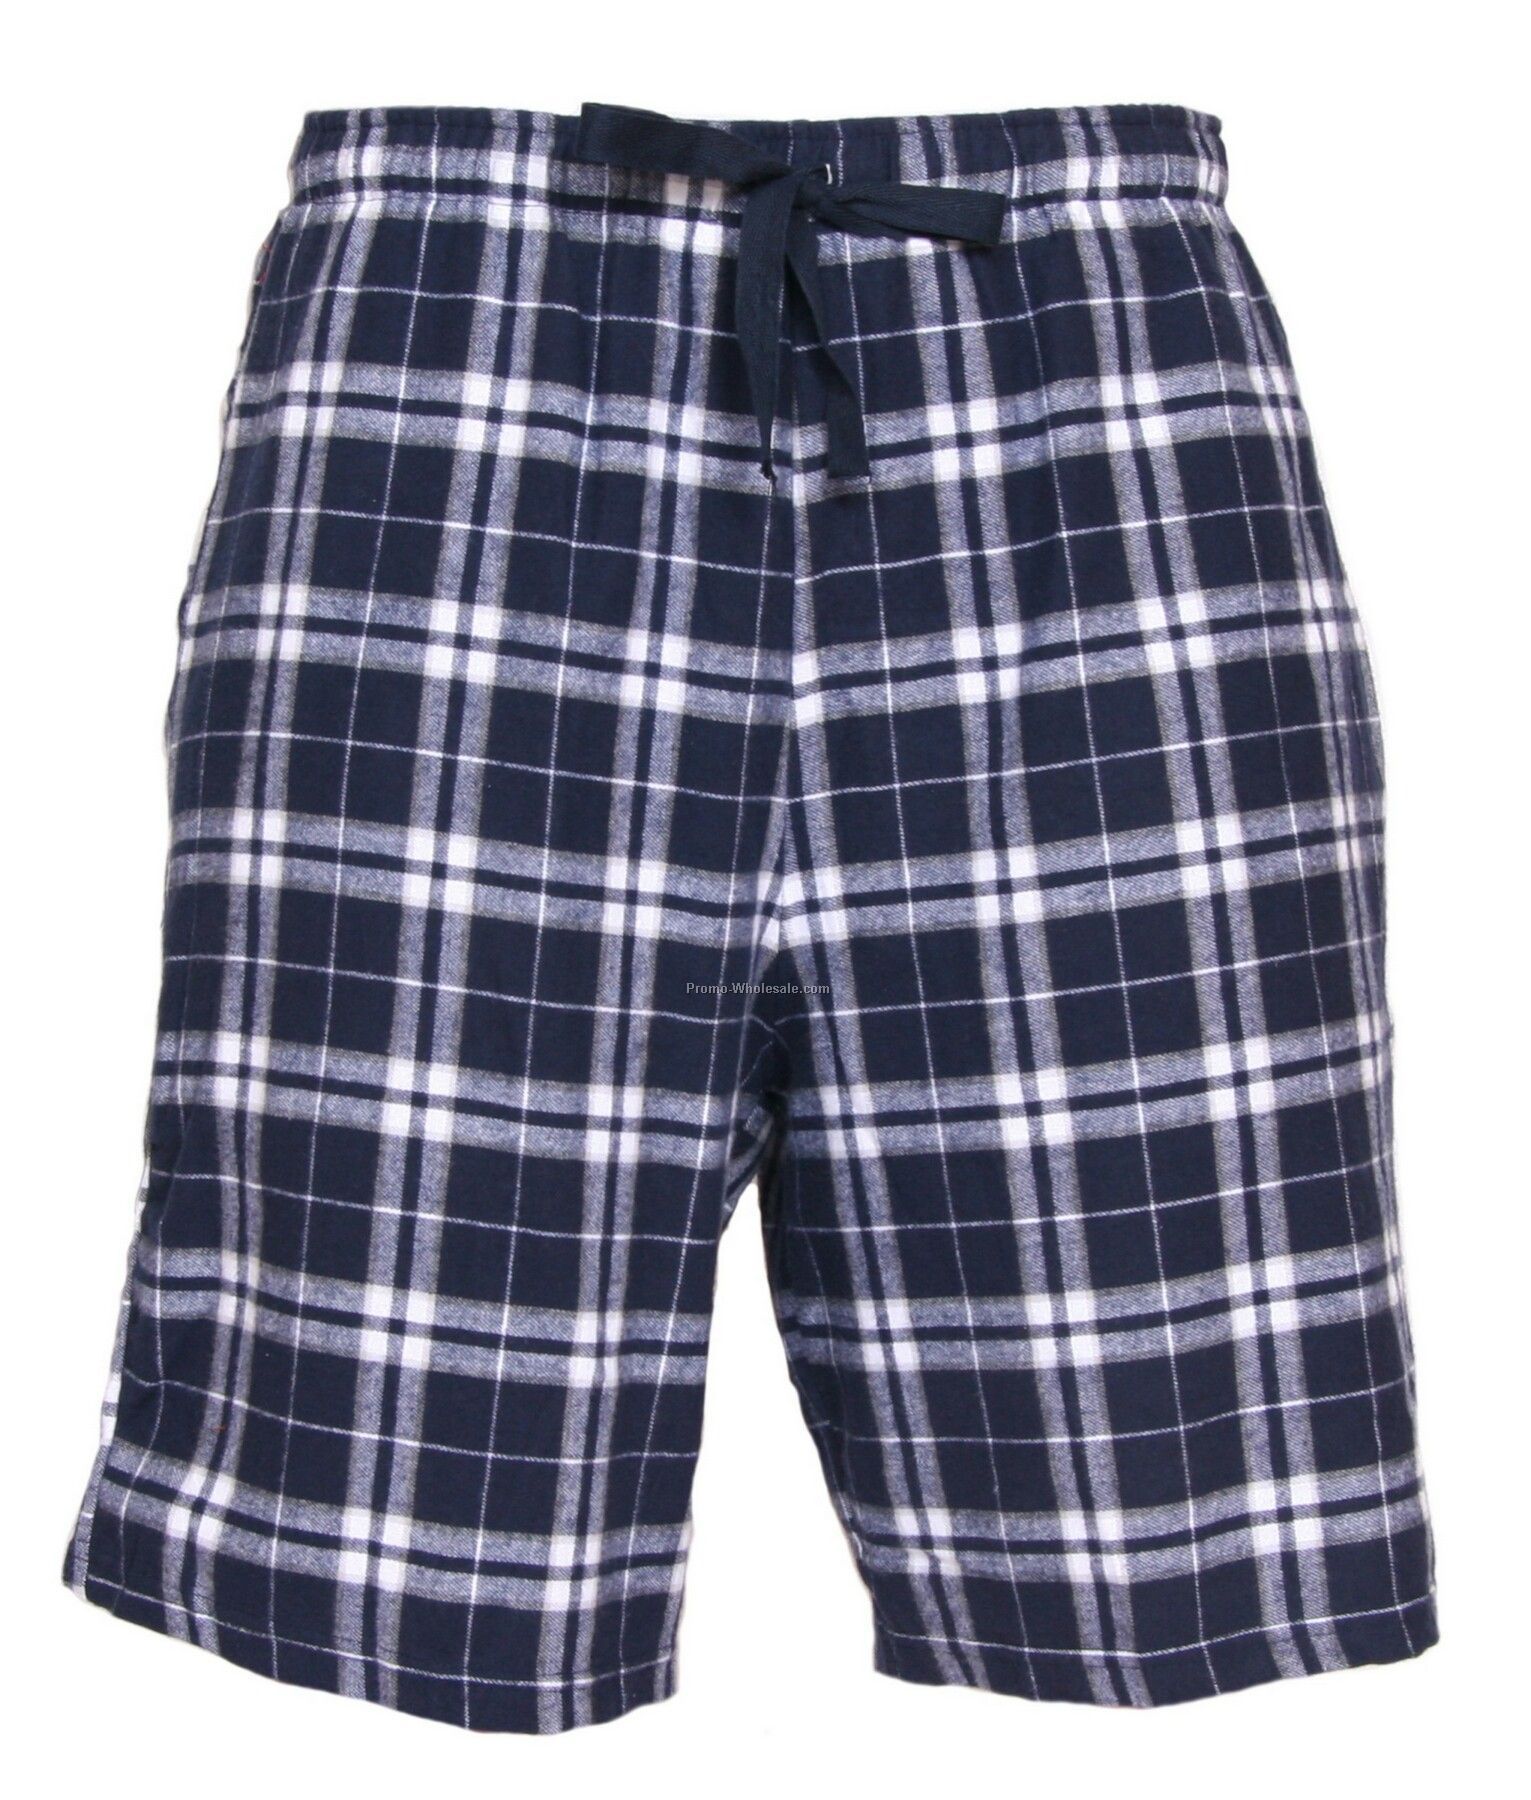 Adults' Navy Blue/Silver Flannel Dorm Shorts (S-xl)